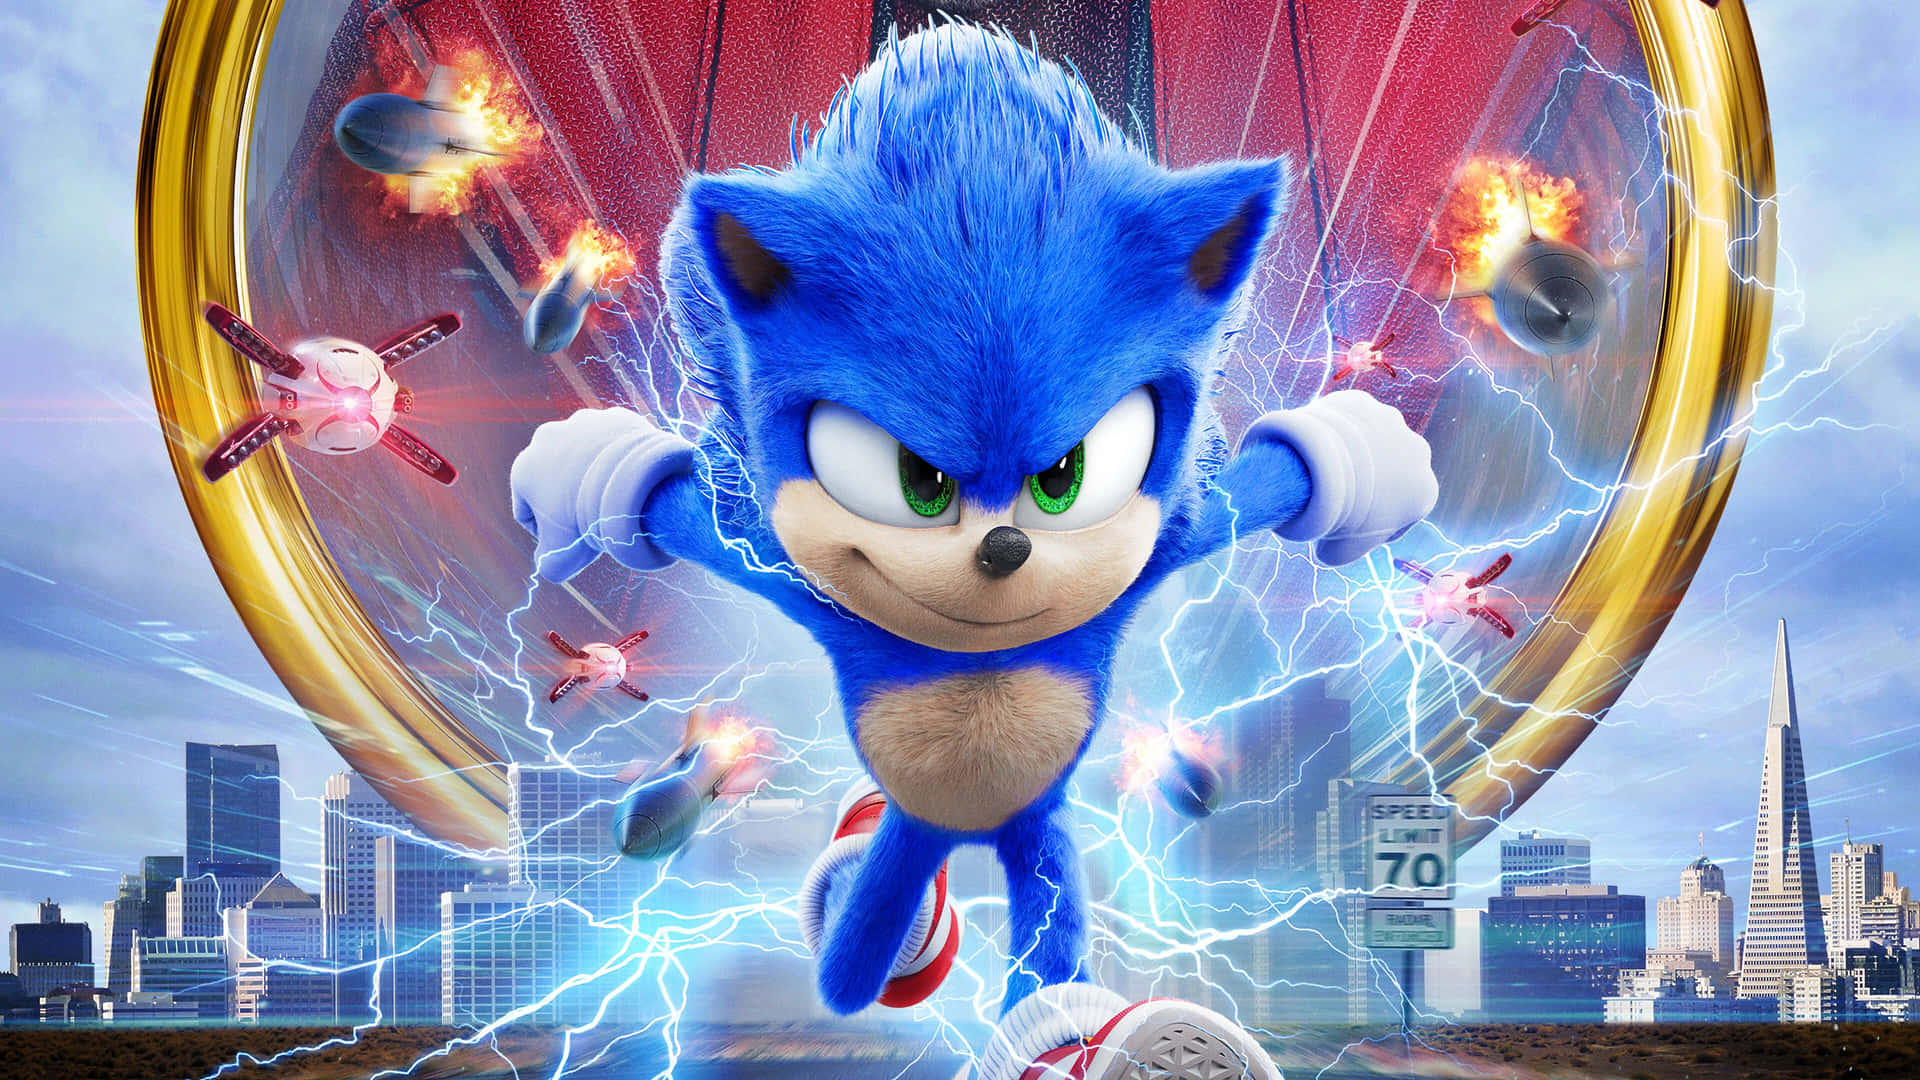 Get ready to move faster than ever with Sonic The Hedgehog 4K Wallpaper